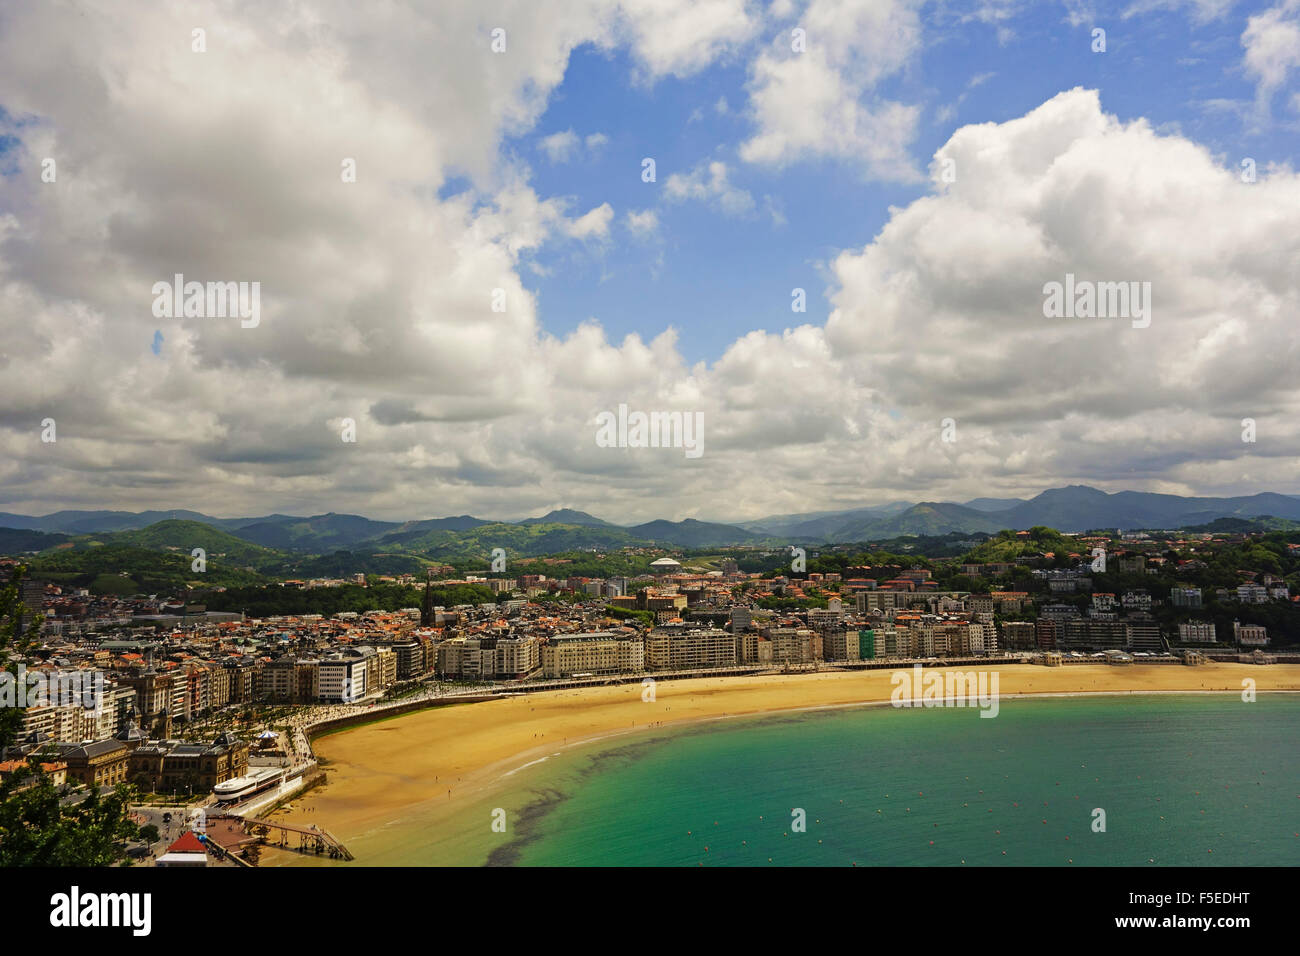 View of San Sebastian from Monte Urgull, Basque Country, Spain, Europe Stock Photo